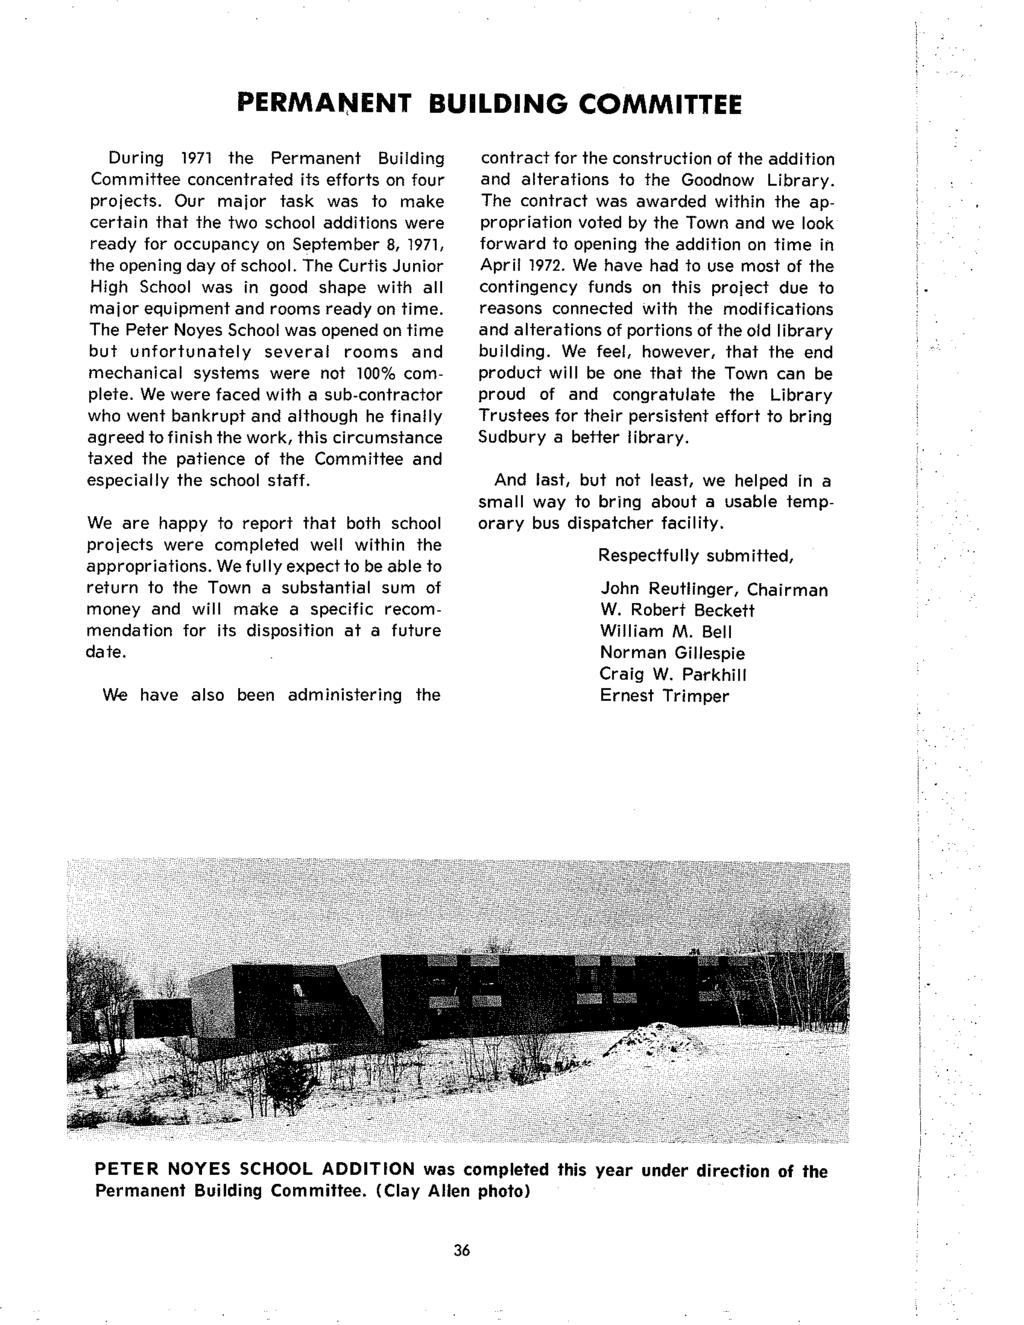 PERMA~ENT BUILDING COMMITTEE During 1971 the Permanent Building Committee concentrated its efforts on four projects.